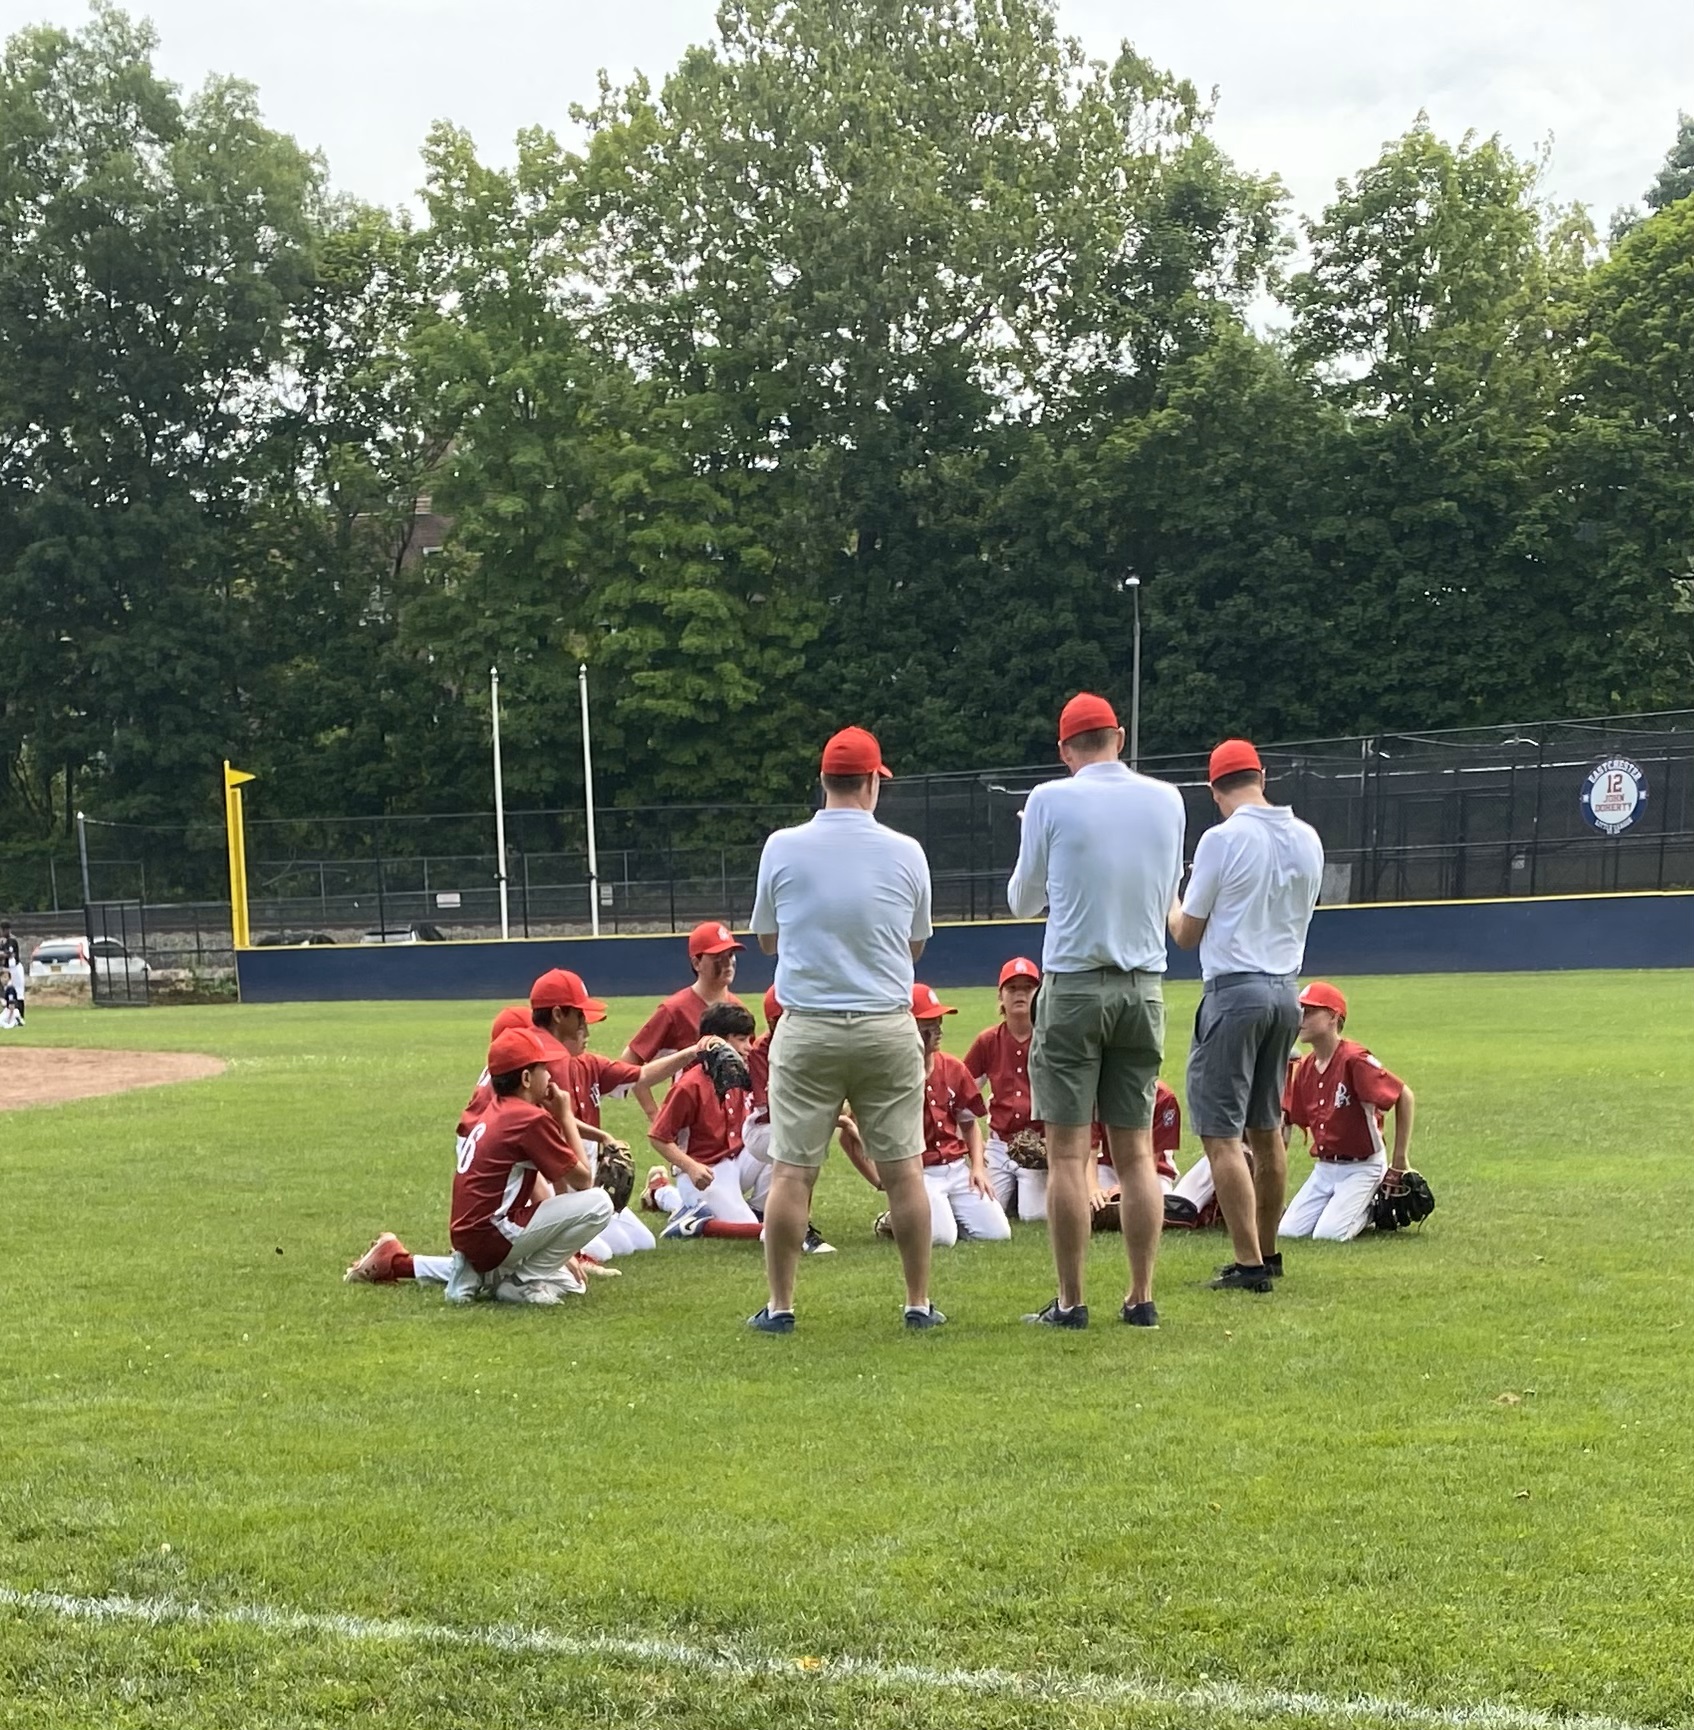 (PHOTO: The 12U Tournament Team huddles after defeating Eastchester 4-1. Their next game is tomorrow, Monday, at 5:30 against Harrison.)